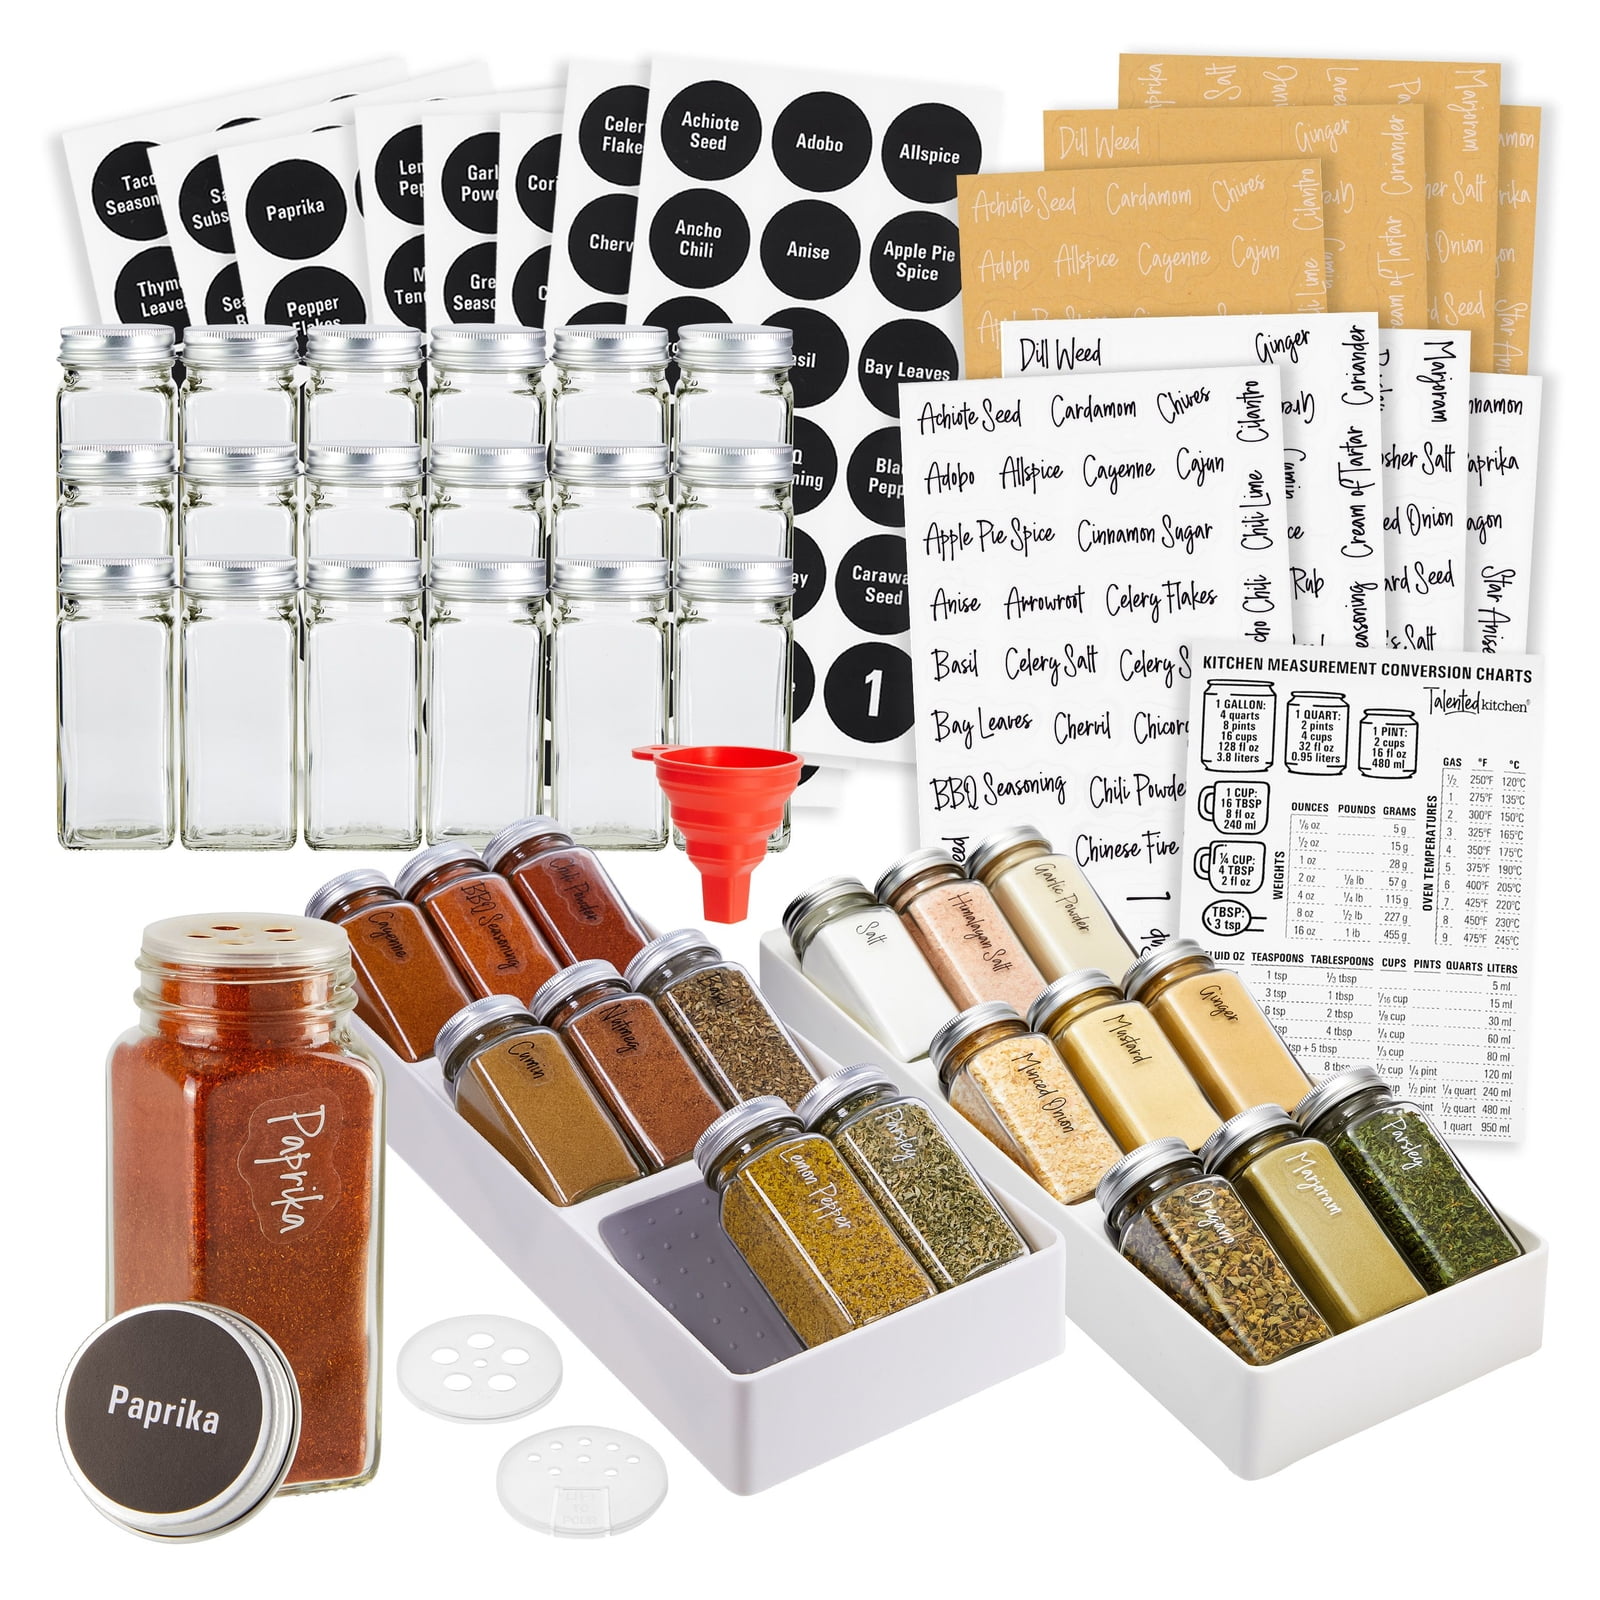 Spice Drawer Organizer, Spice Rack with 28 Spice Jars, 386 Labels, Marker &  Funnel, 4 Tier Heavy Gauge Steel Seasoning Organizer Tray for Kitchen Drawer,  Cabinets, Countertop, 13.4 Wide x 18.7 Deep